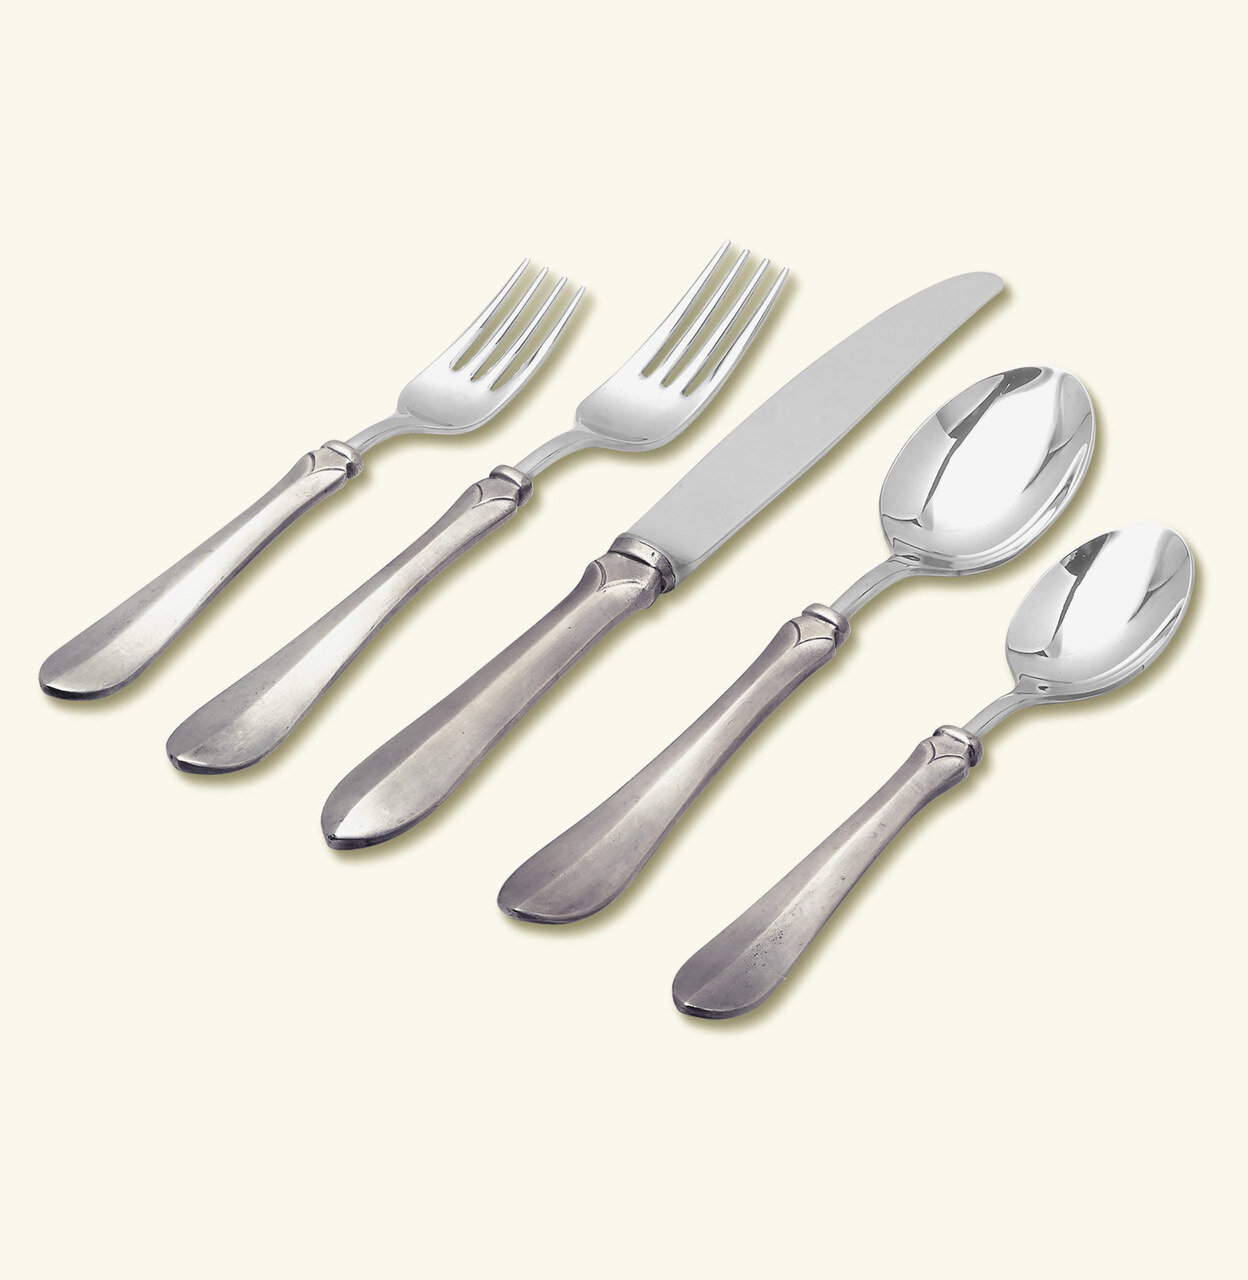 Match Pewter Sofia 5 Piece Place Setting